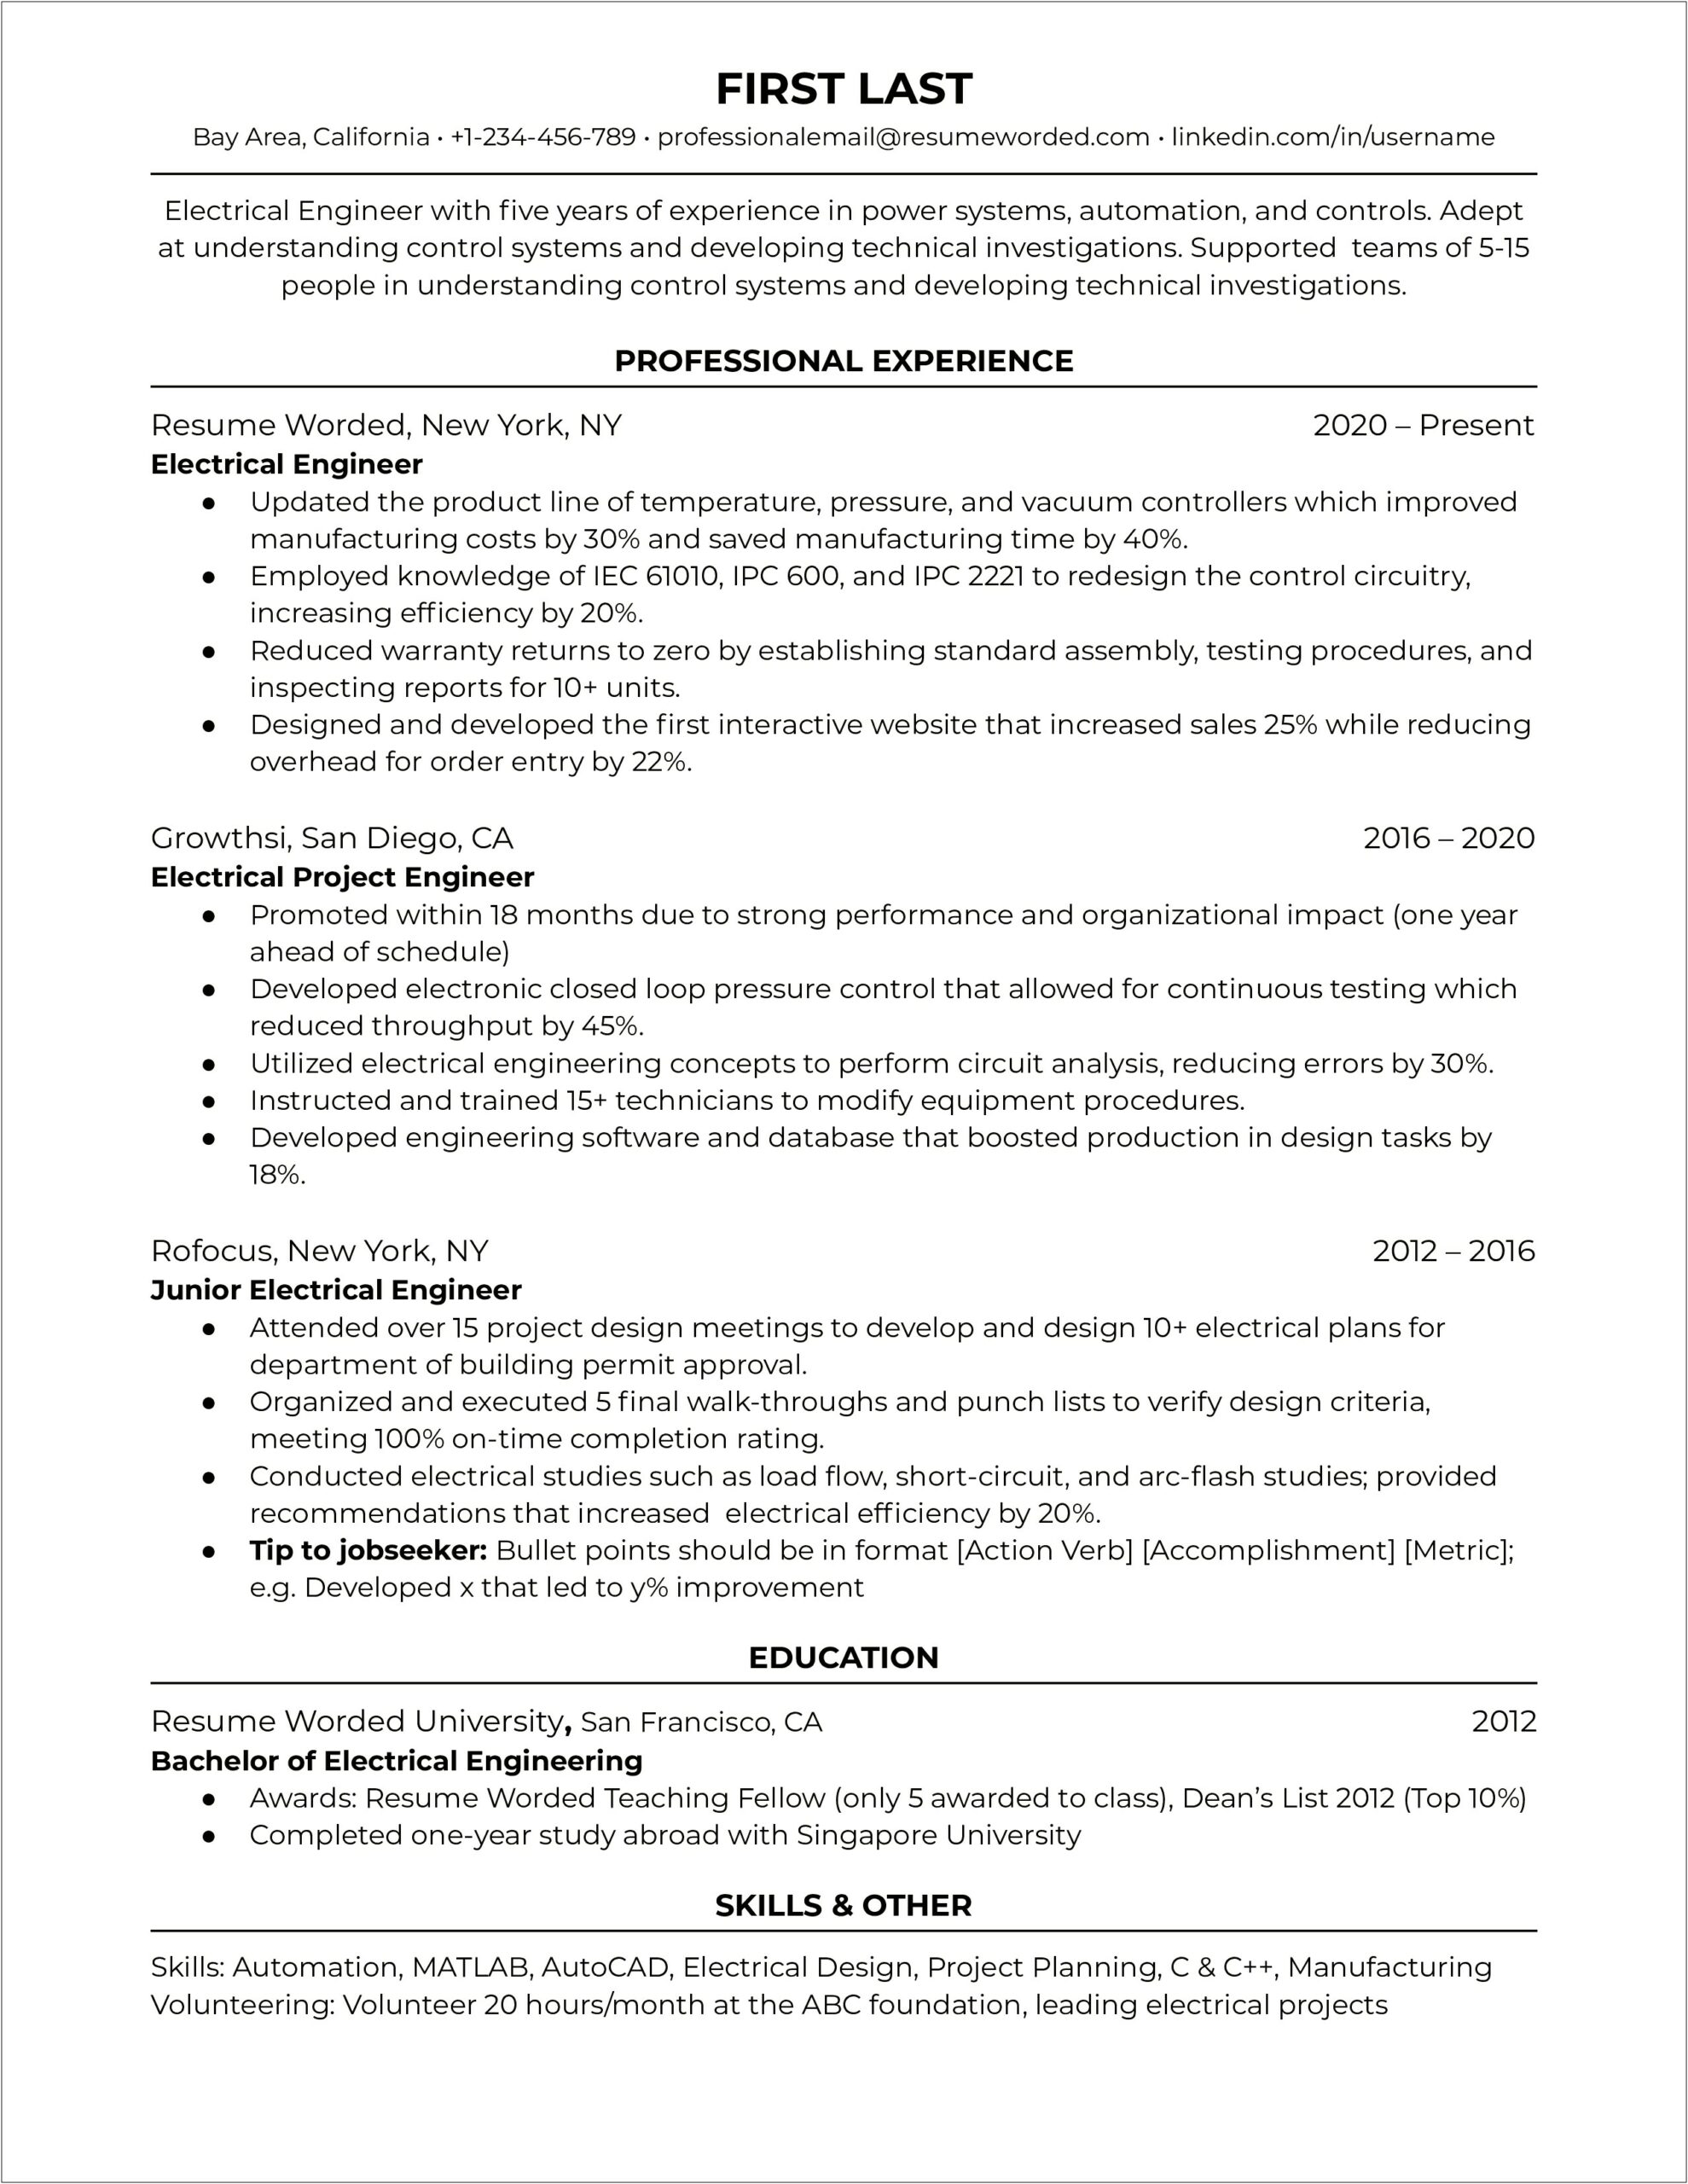 Sample Us Electrical Engineer Applicant Resumes